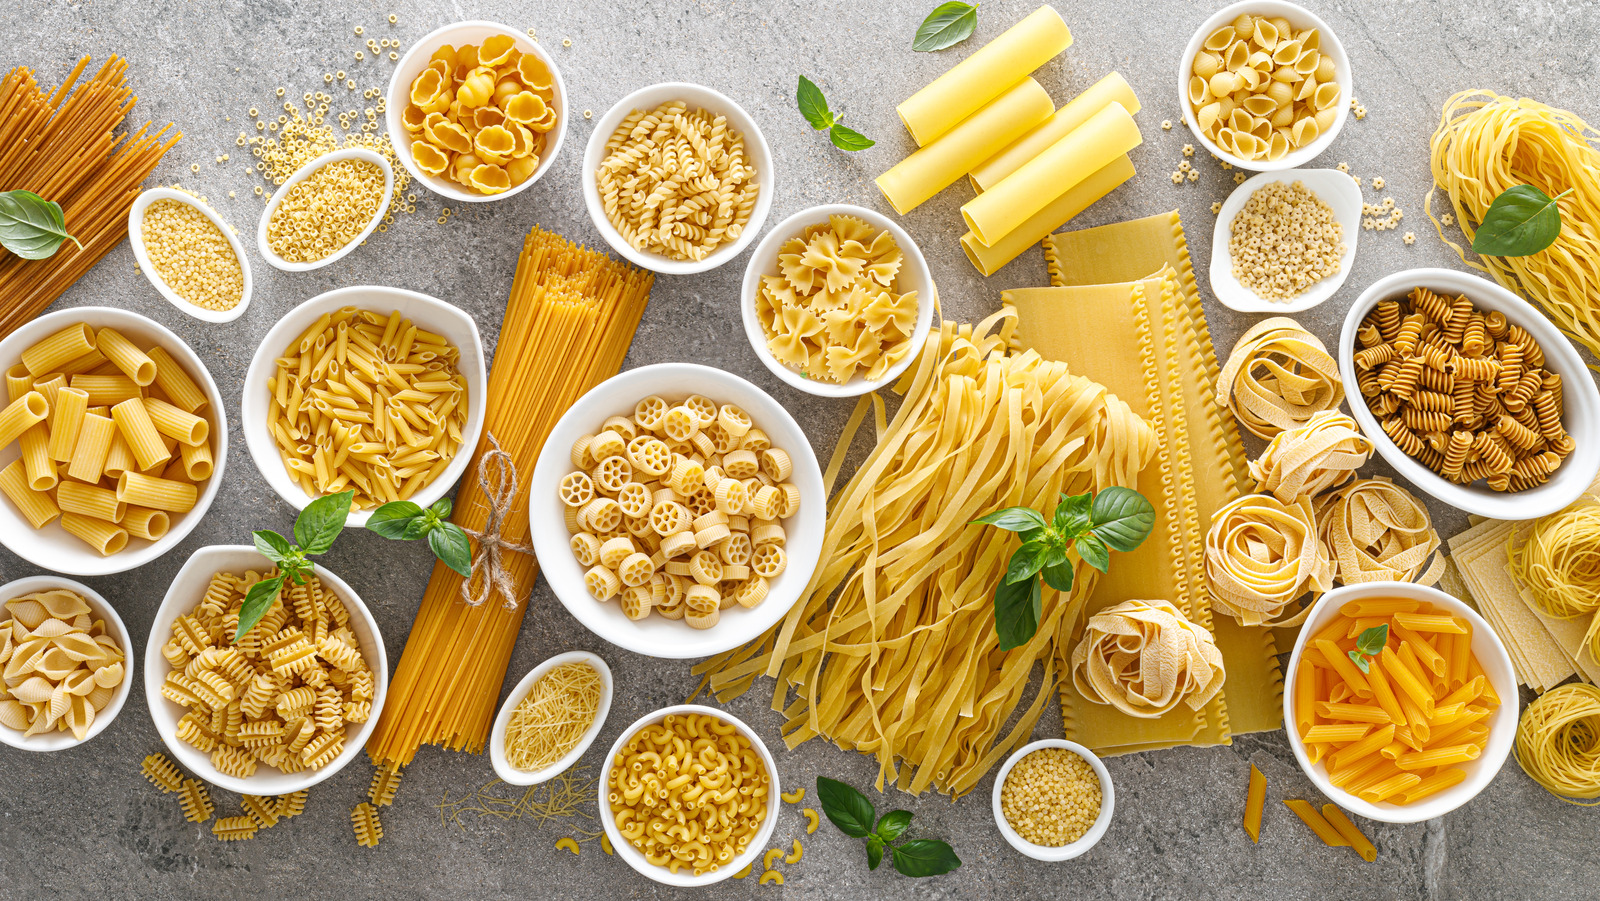 51 Types Of Pasta From A to Z (With Photos!)